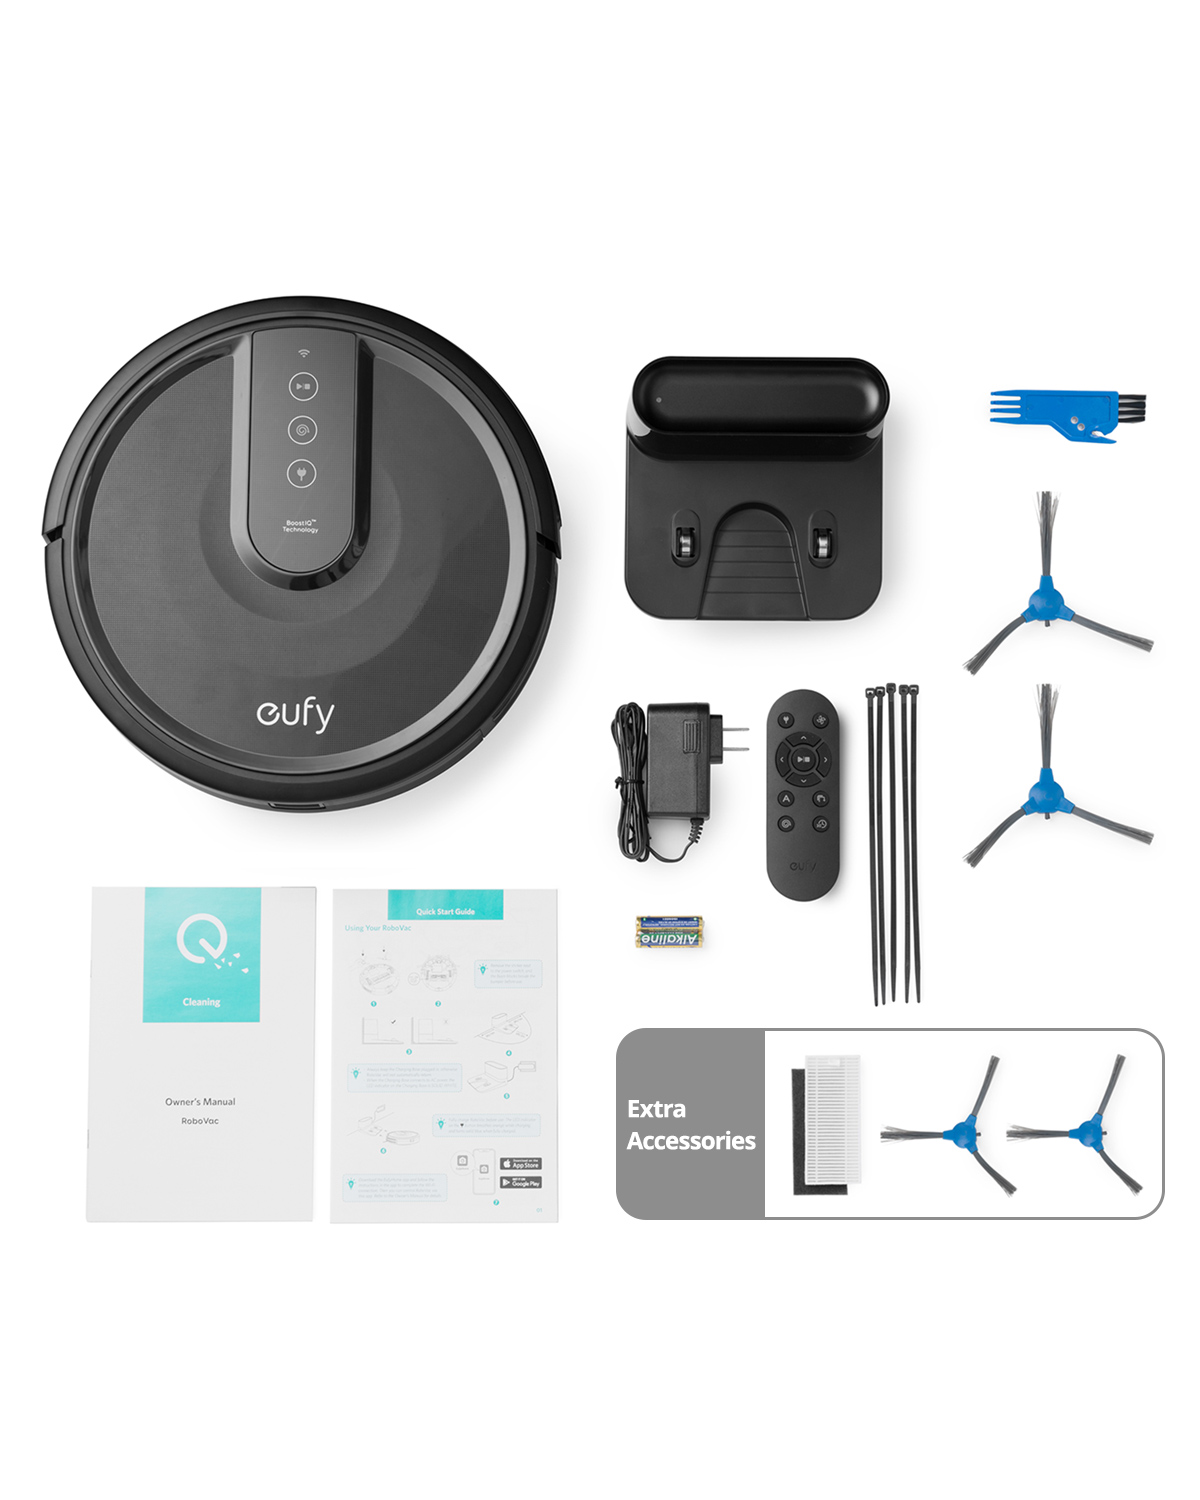 Anker eufy 25C Wi-Fi Connected Robot Vacuum, Great for Picking up Pet Hairs, Quiet, Slim - image 8 of 10